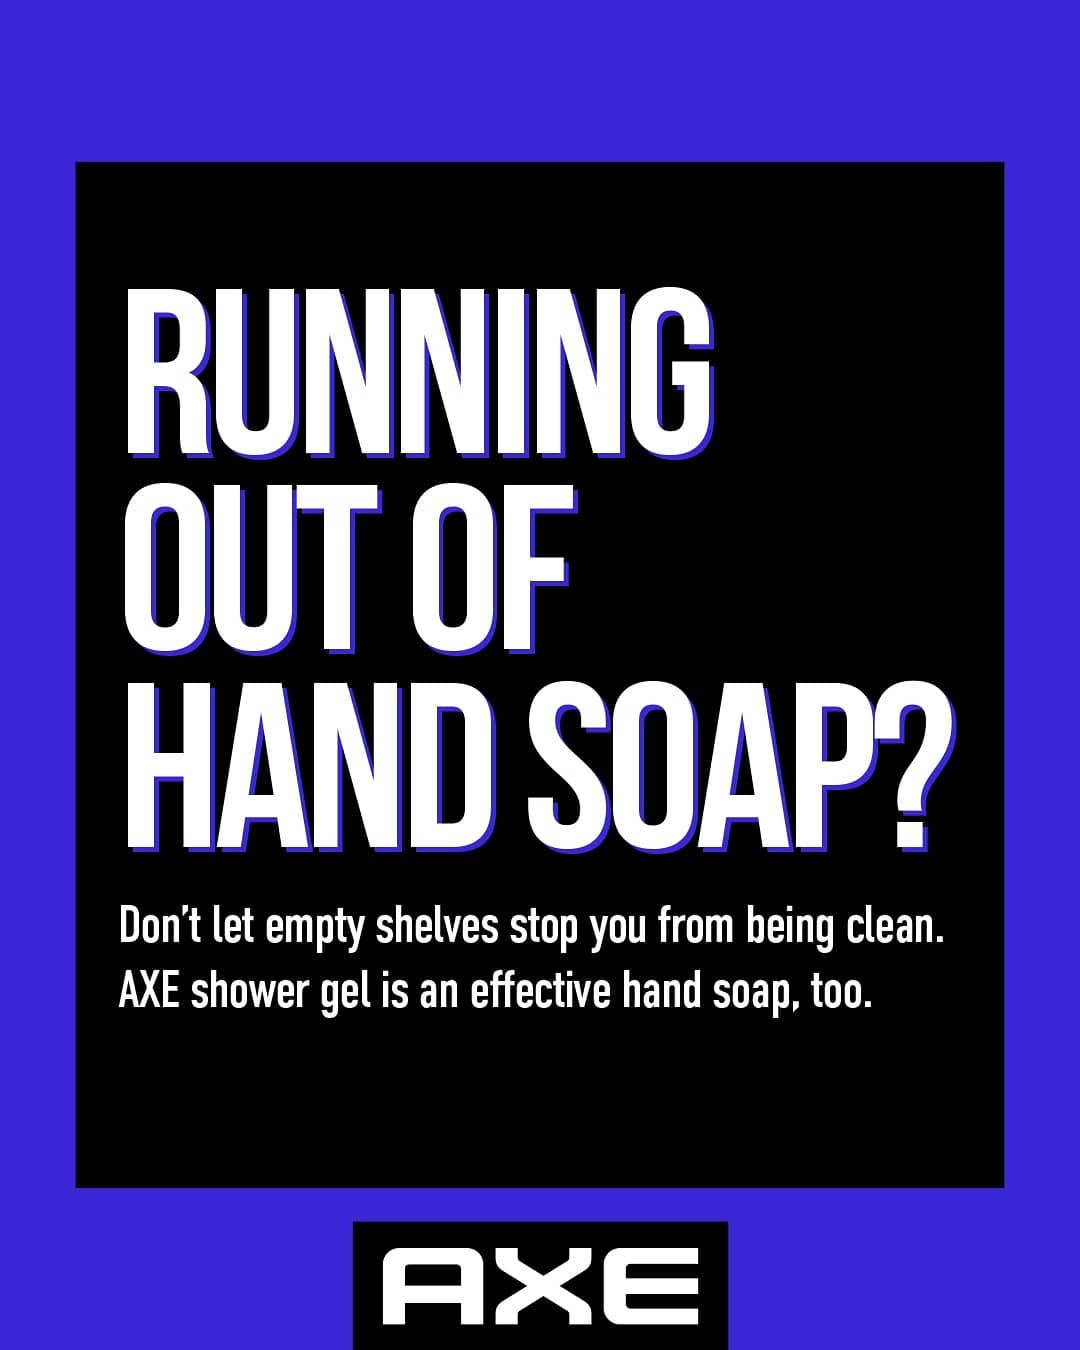 AXE - Having a hard time finding hand soap right now? Don't worry. The body wash sitting in your shower can also get your hands clean. Suds up and stay safe 🖤
.
.
.
#SafeHands #HandWashing #WashYourHa...